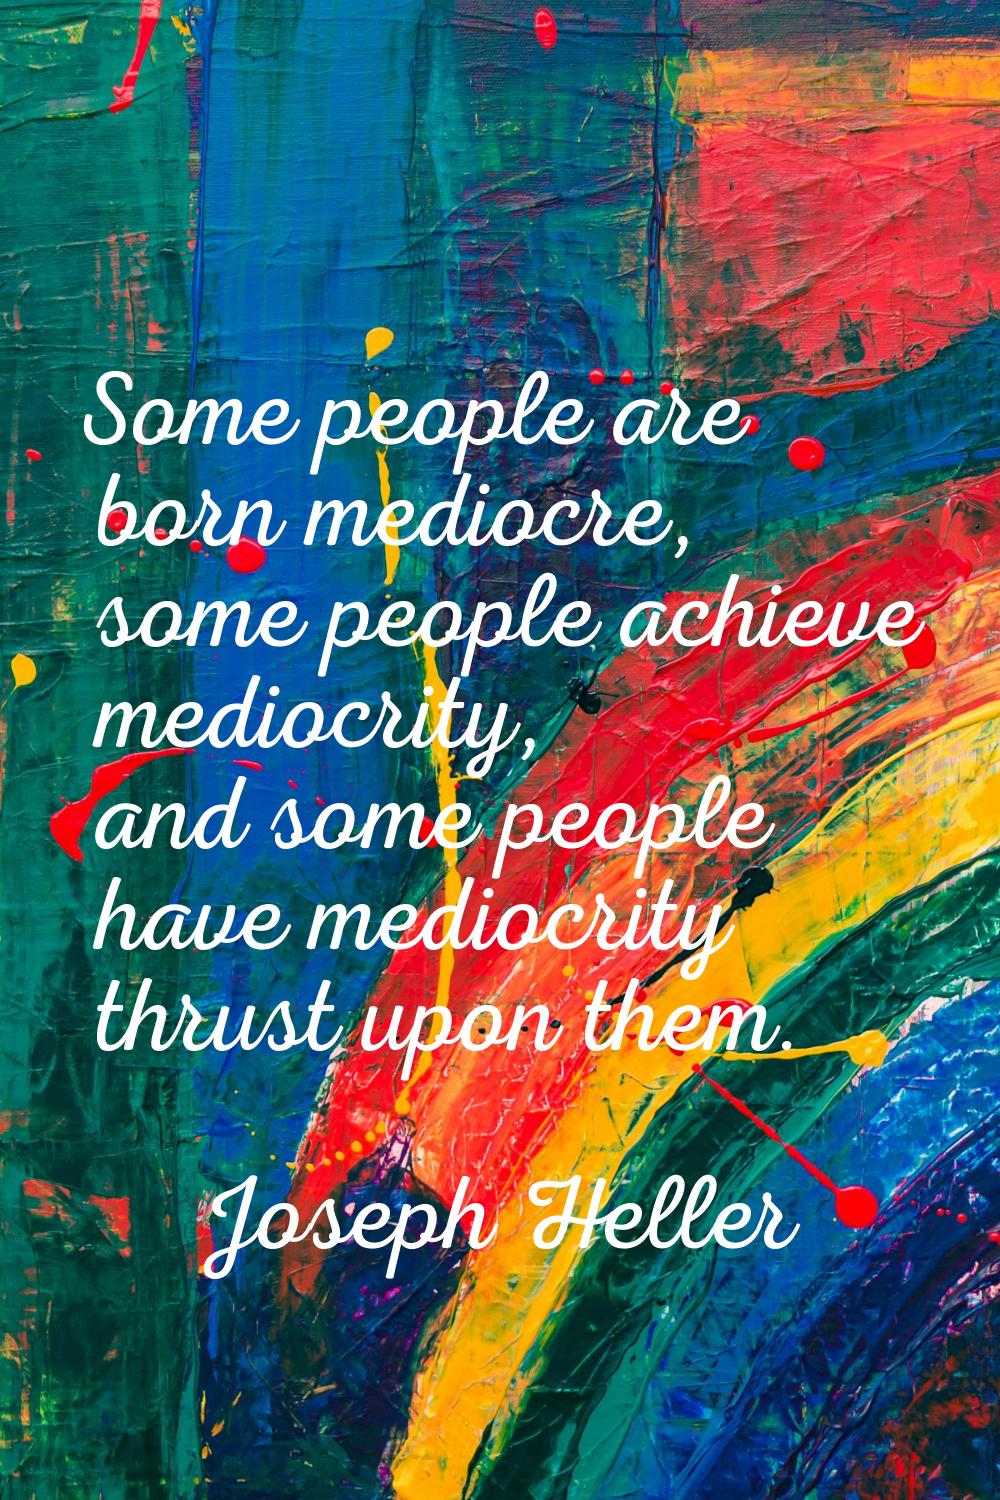 Some people are born mediocre, some people achieve mediocrity, and some people have mediocrity thru